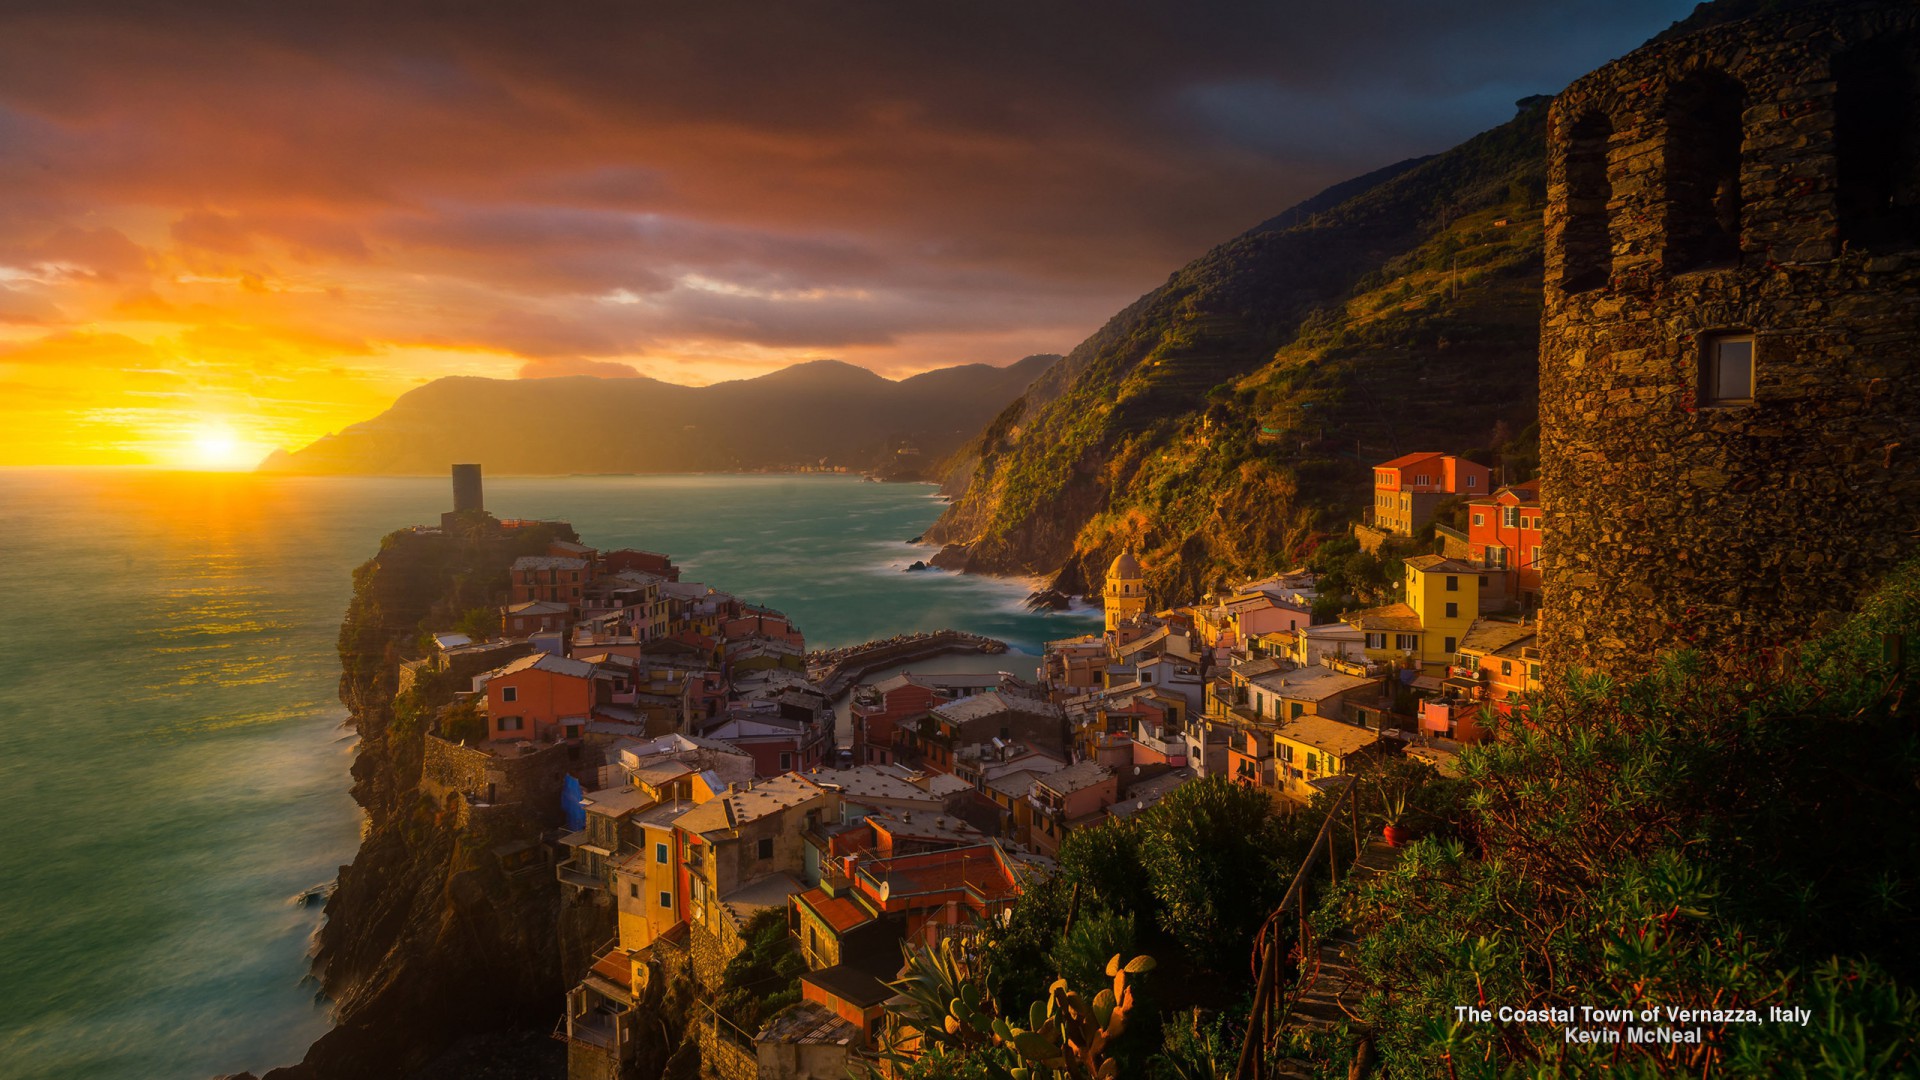 photography, hdr, house, italy, mountain, ocean, sunset, vernazza, village